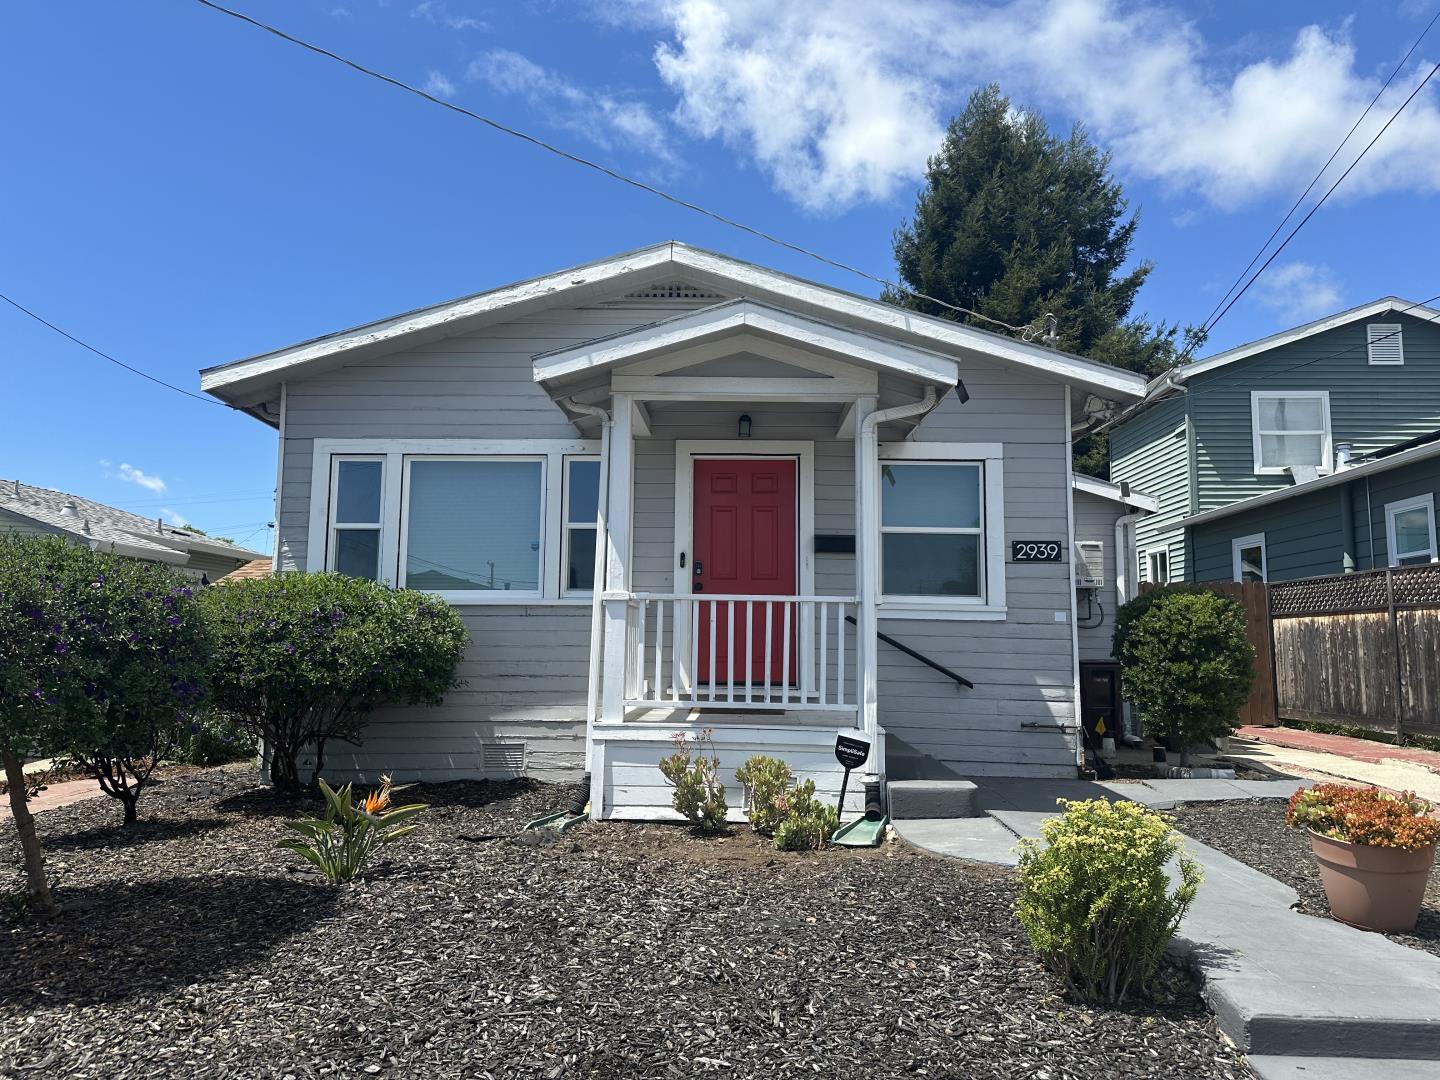 Photo of 2939 60th Ave in Oakland, CA